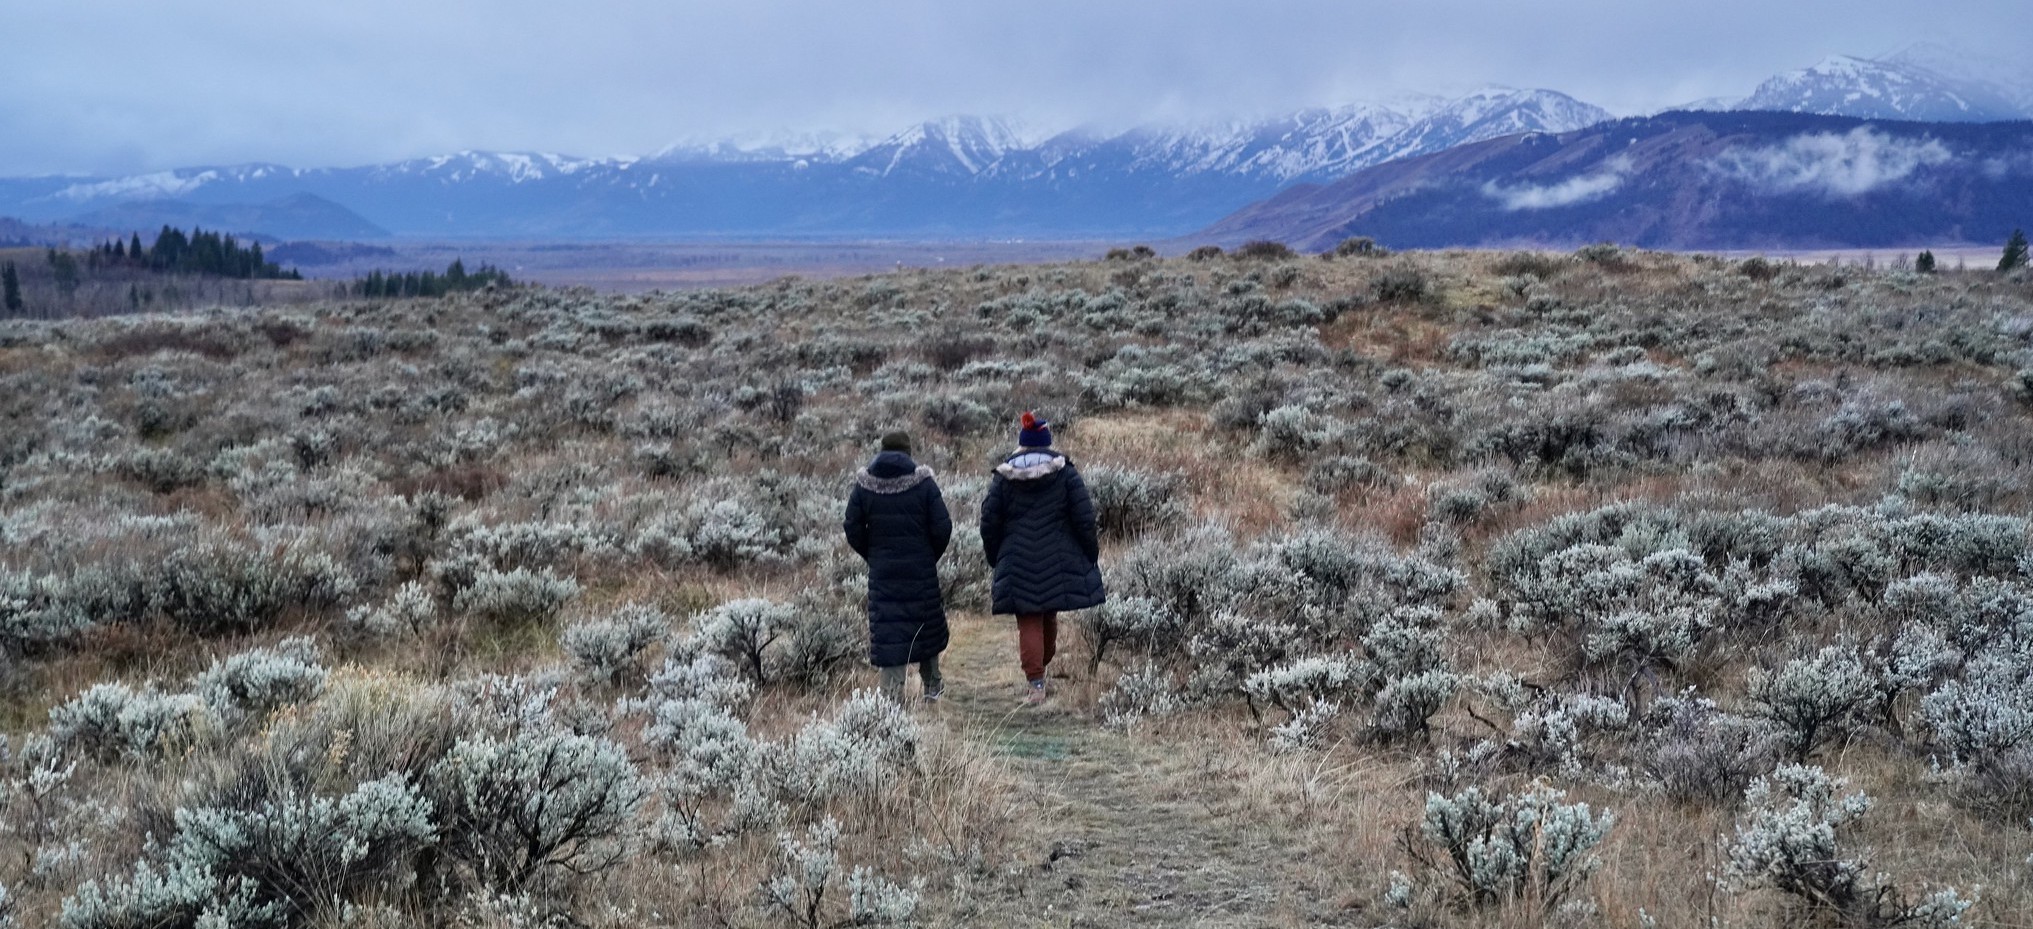 Two people walking in sagebrush with snow-capped mountains in distance, topped by low clouds.